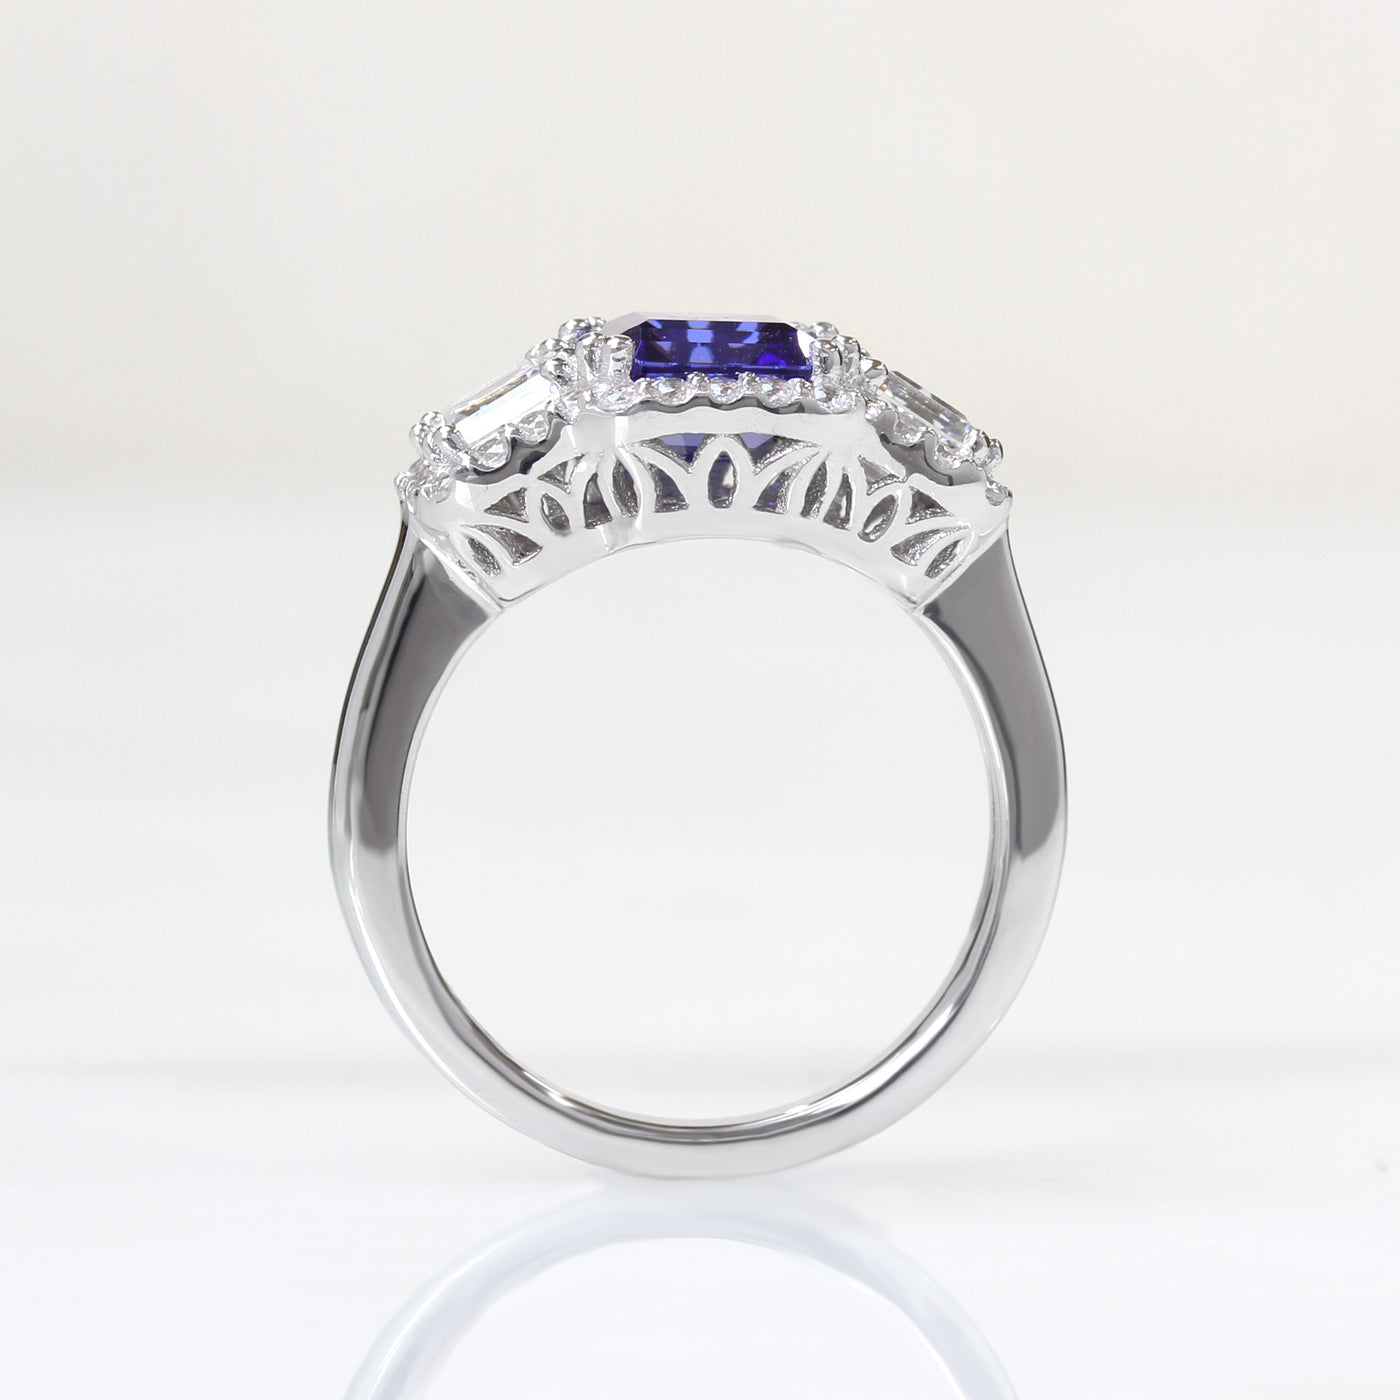 Simulated 2 CT Tanzanite Ring, Platinum Plated Sterling Silver